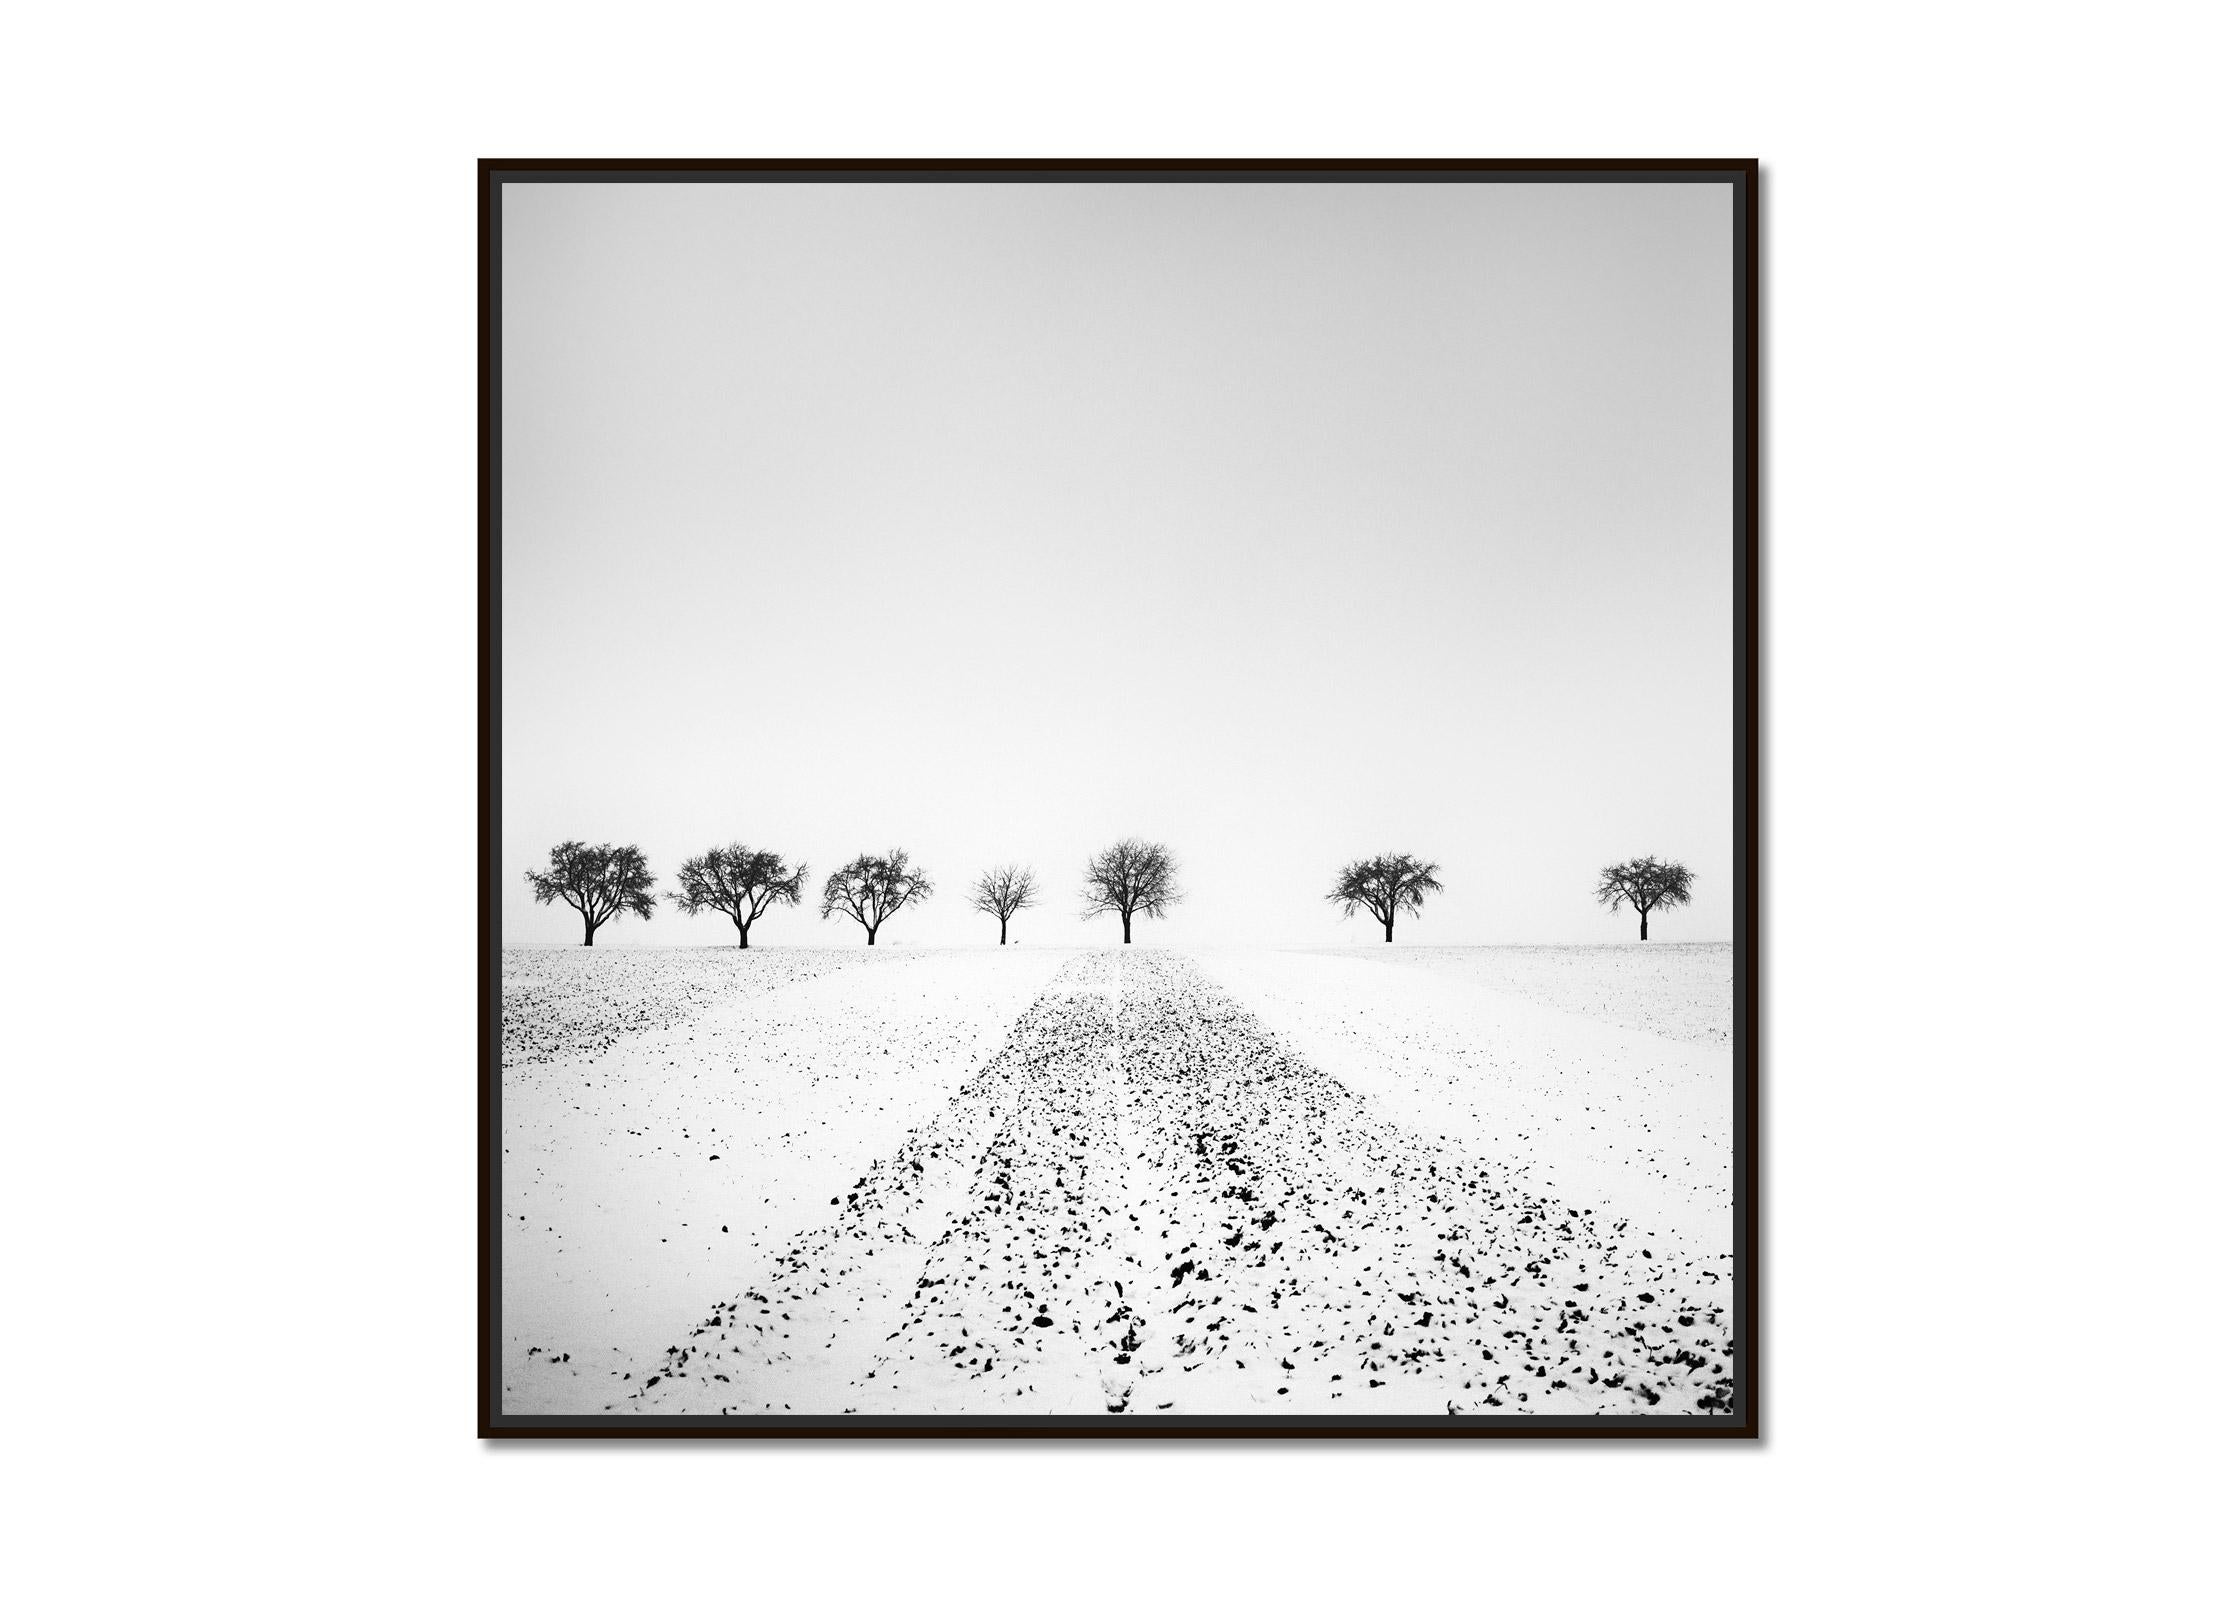 Trees in snowy Field, Winterland, black and white, landscape photography, print - Photograph by Gerald Berghammer